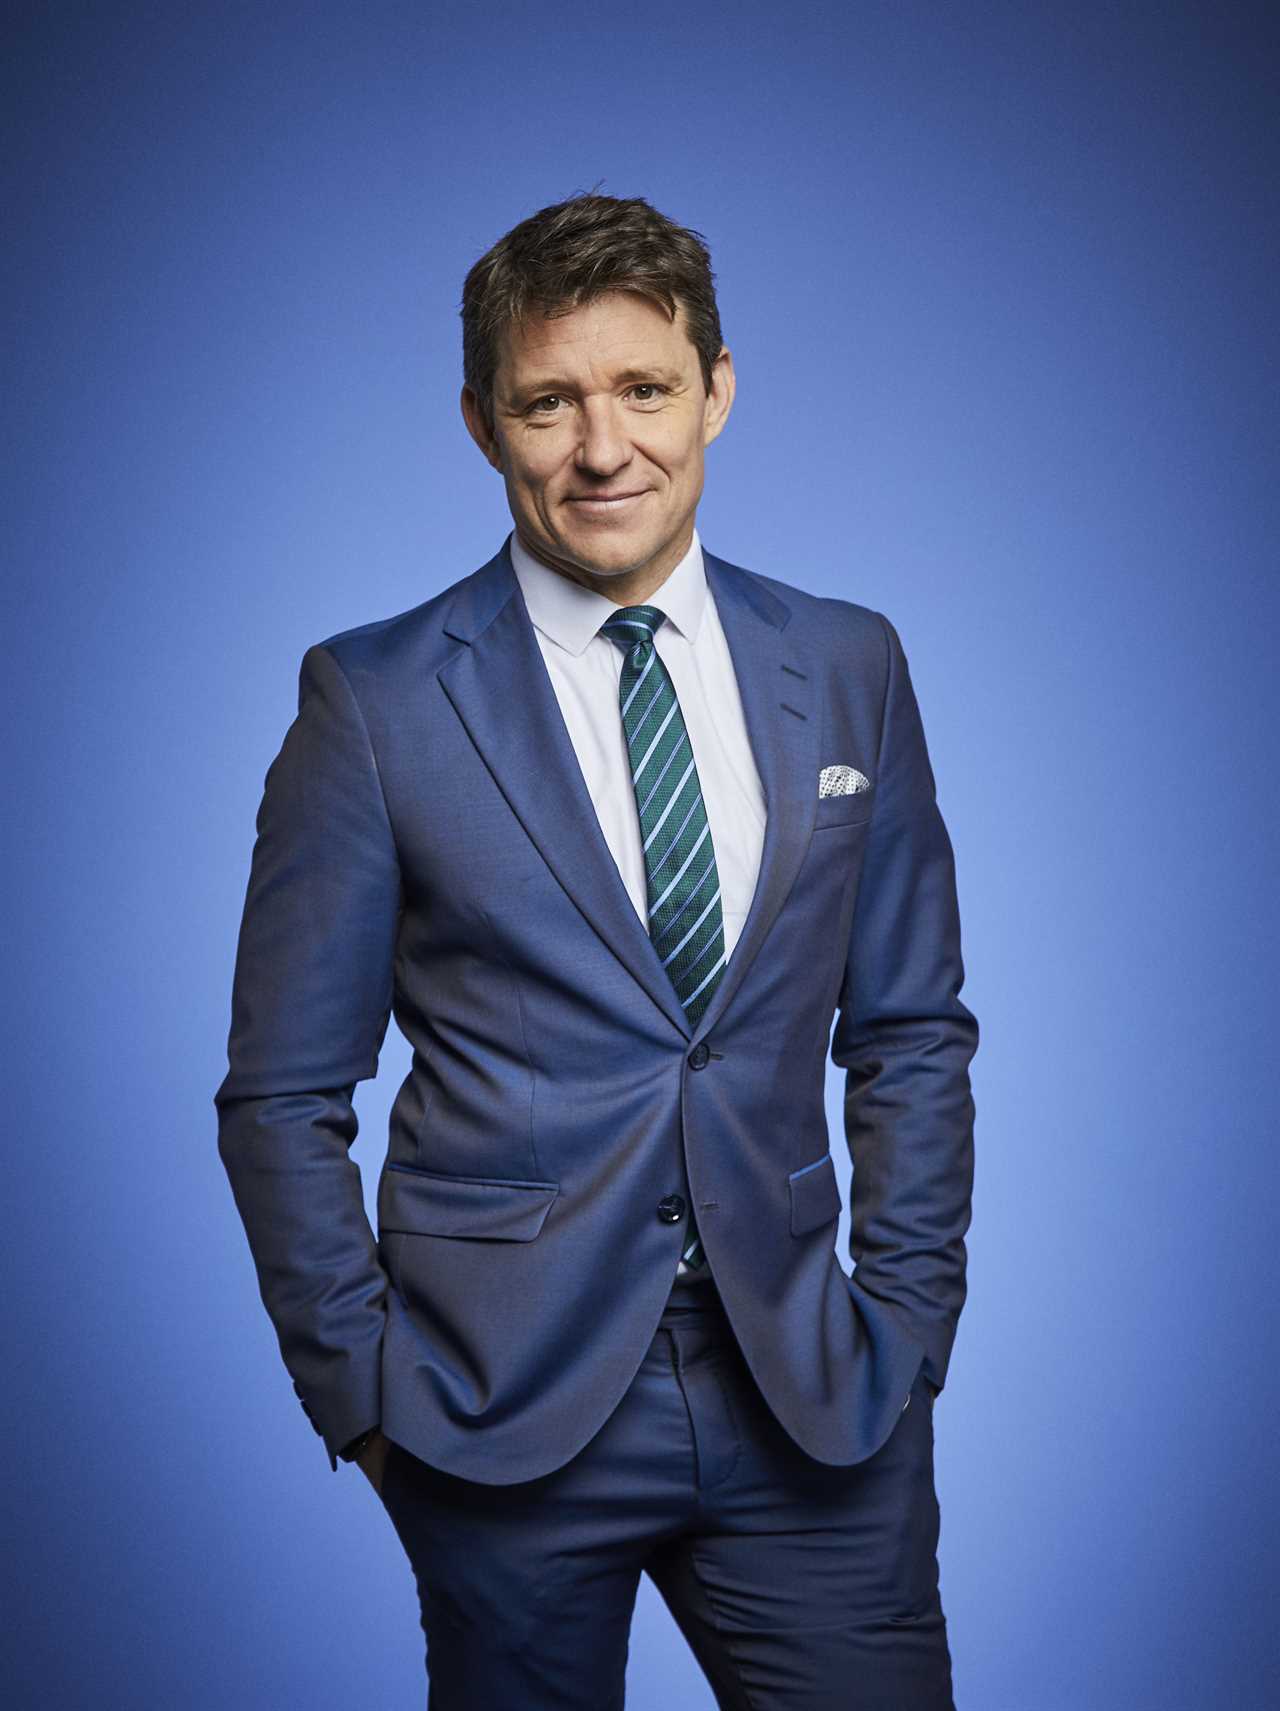 Ben Shephard and Cat Deeley to Replace Holly Willoughby and Phillip Schofield on This Morning